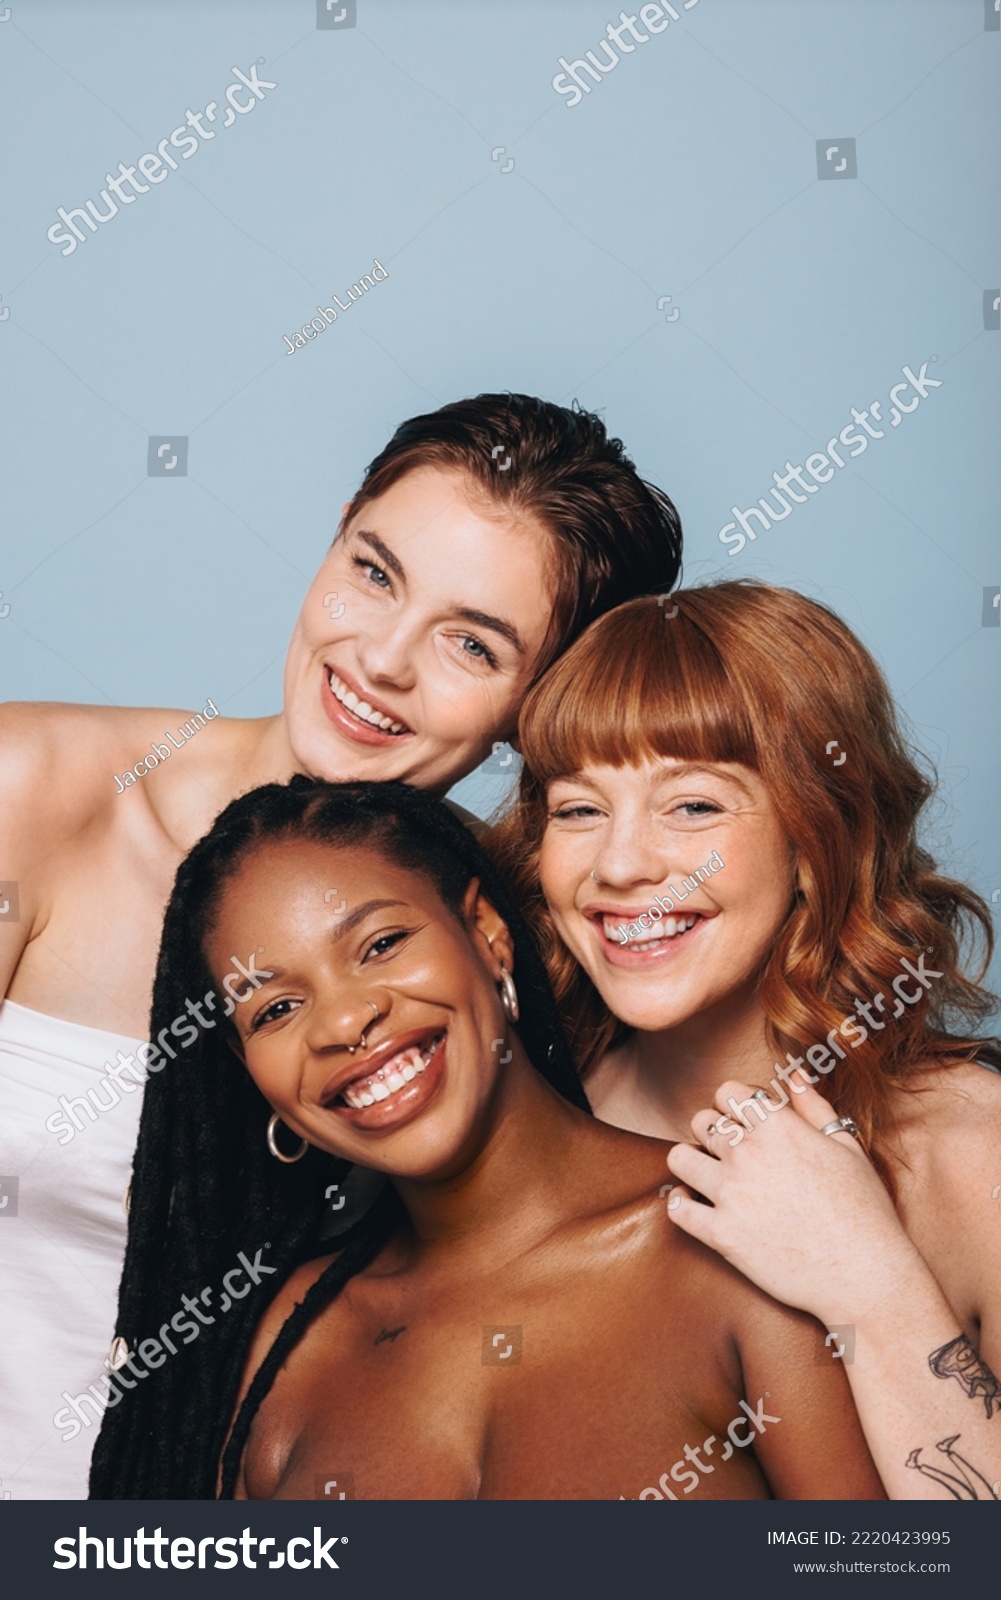 Happy women with different skin tones smiling at the camera in a studio. Group of body confident young women embracing their natural beauty. Three body positive young women standing together. #2220423995